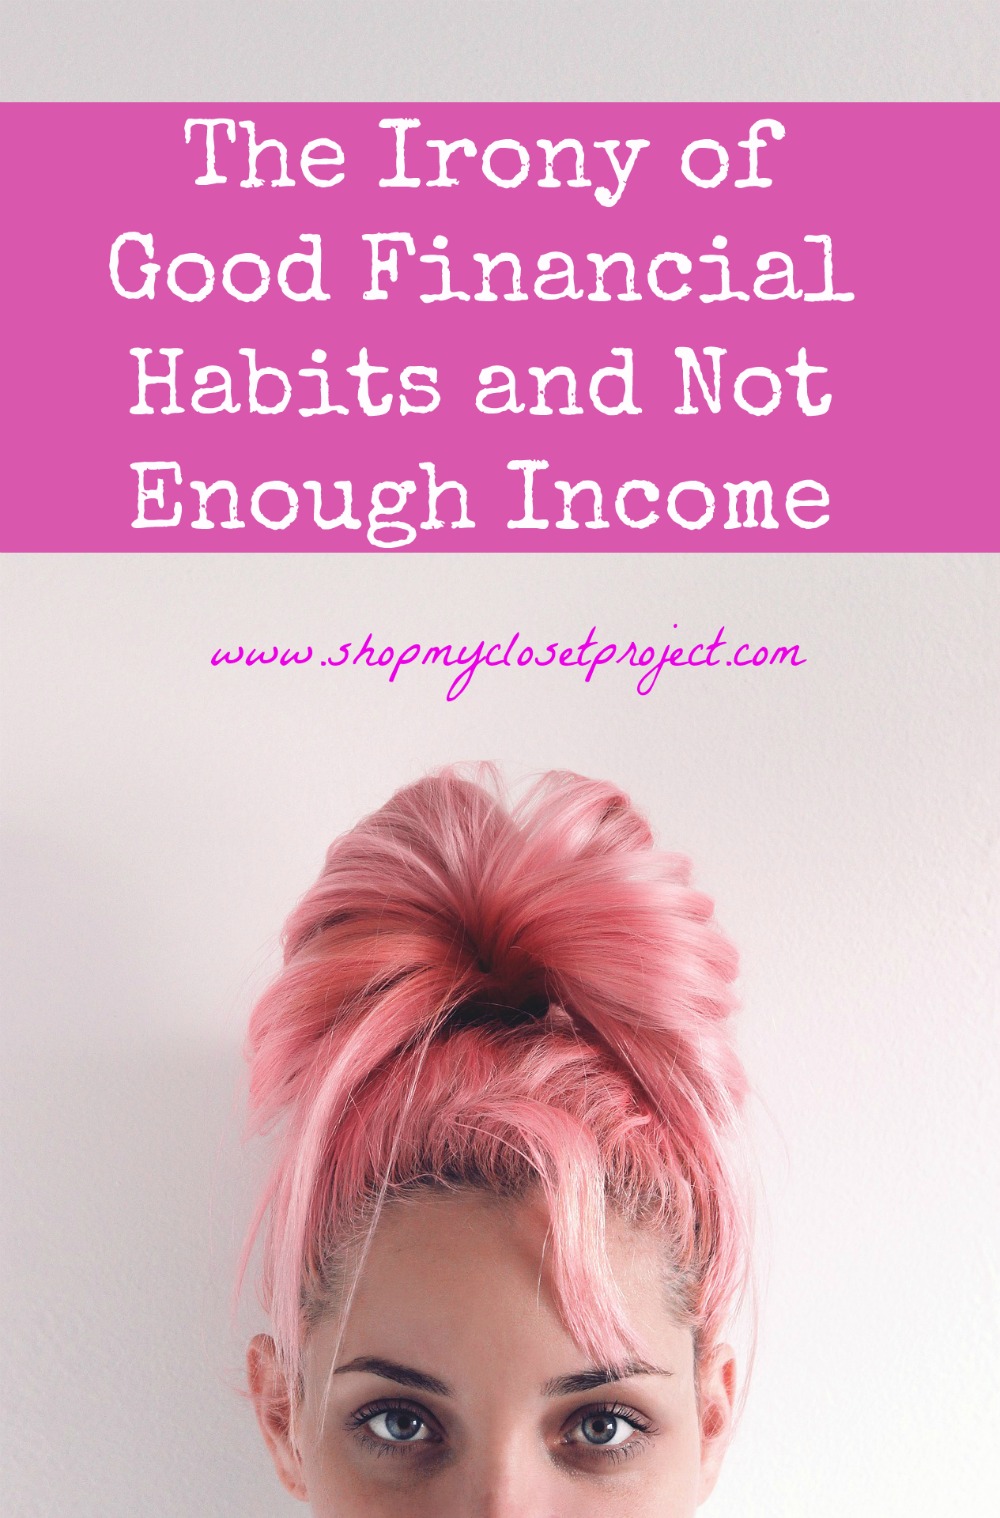 The Irony of Good Financial Habits and Not Enough Income